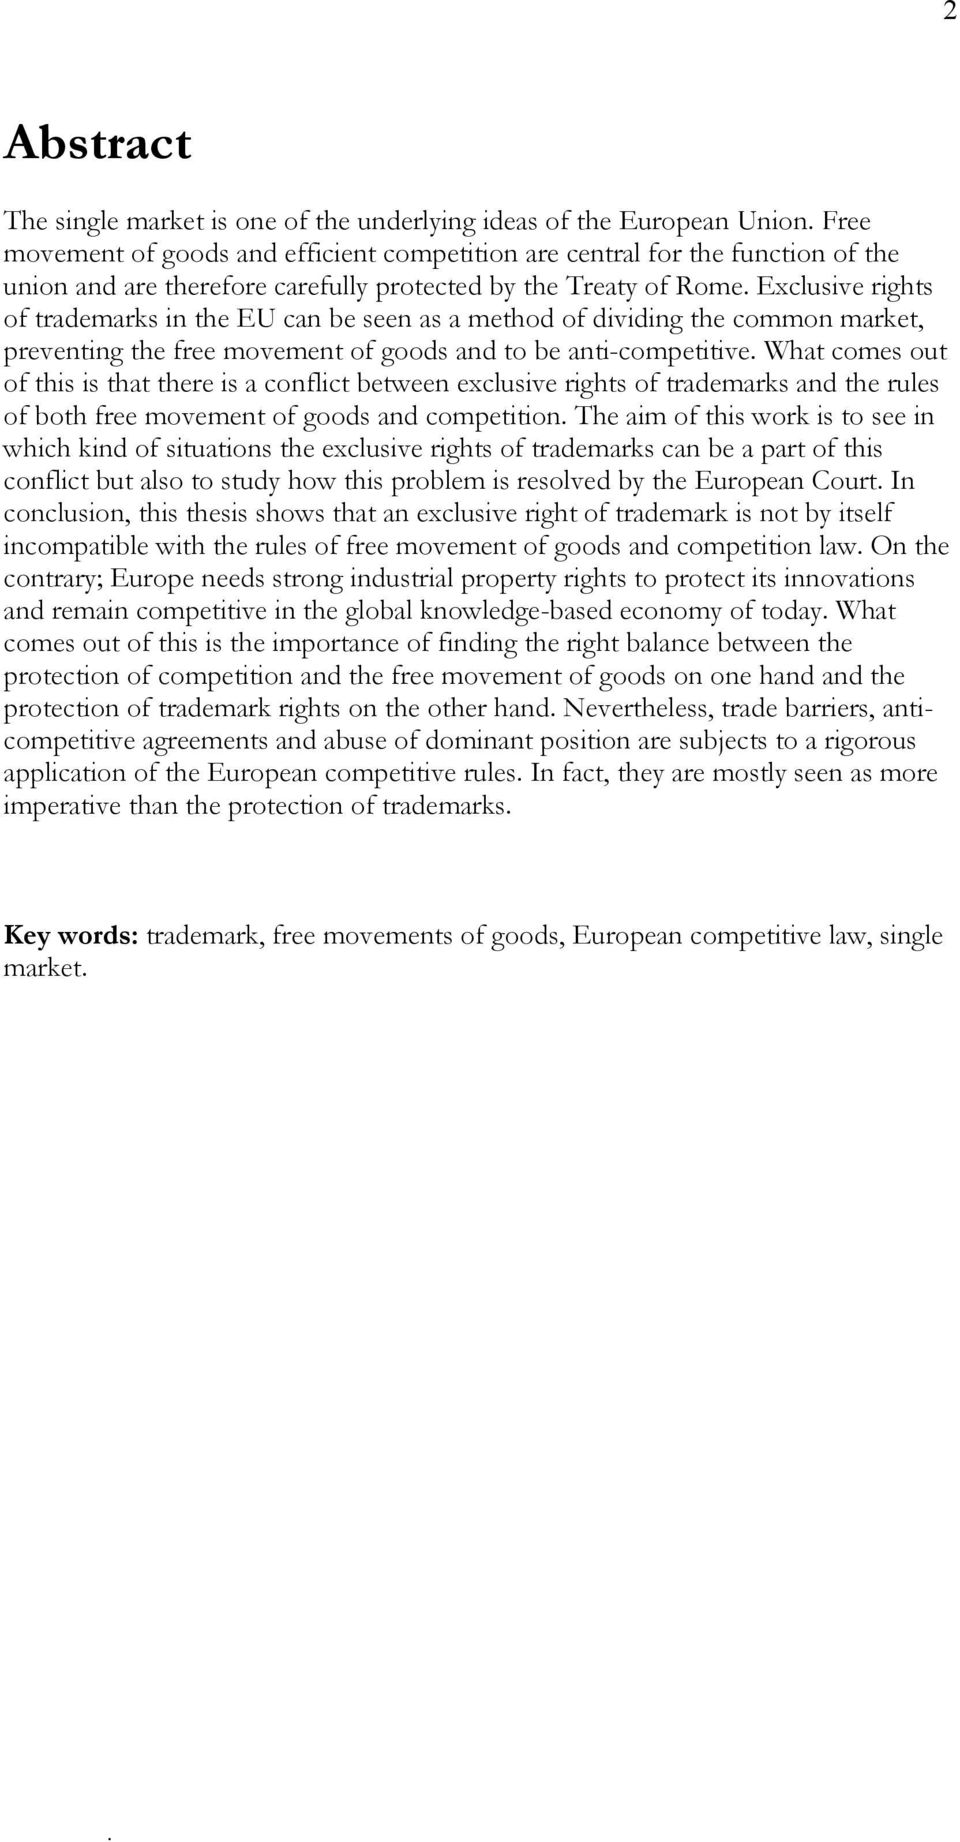 anti-competitive What comes out of this is that there is a conflict between exclusive rights of trademarks and the rules of both free movement of goods and competition The aim of this work is to see